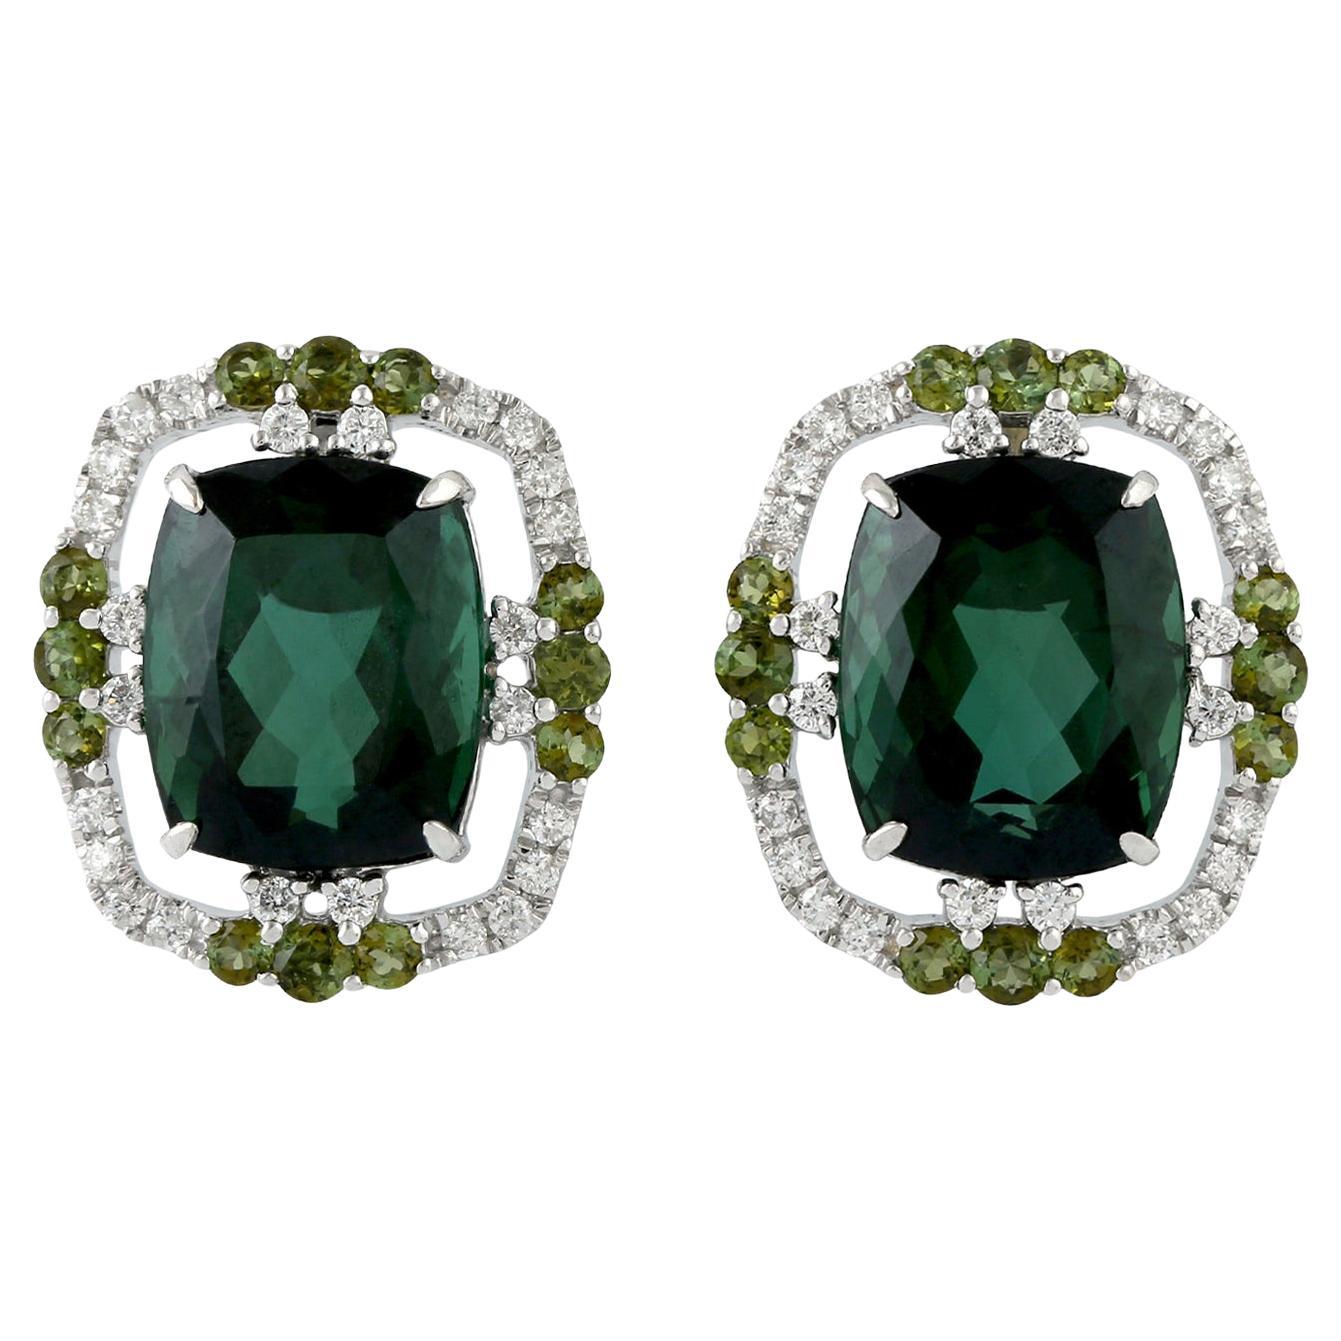 10.55 ct Green Tourmaline Studs With Diamonds Made In 18k White Gold